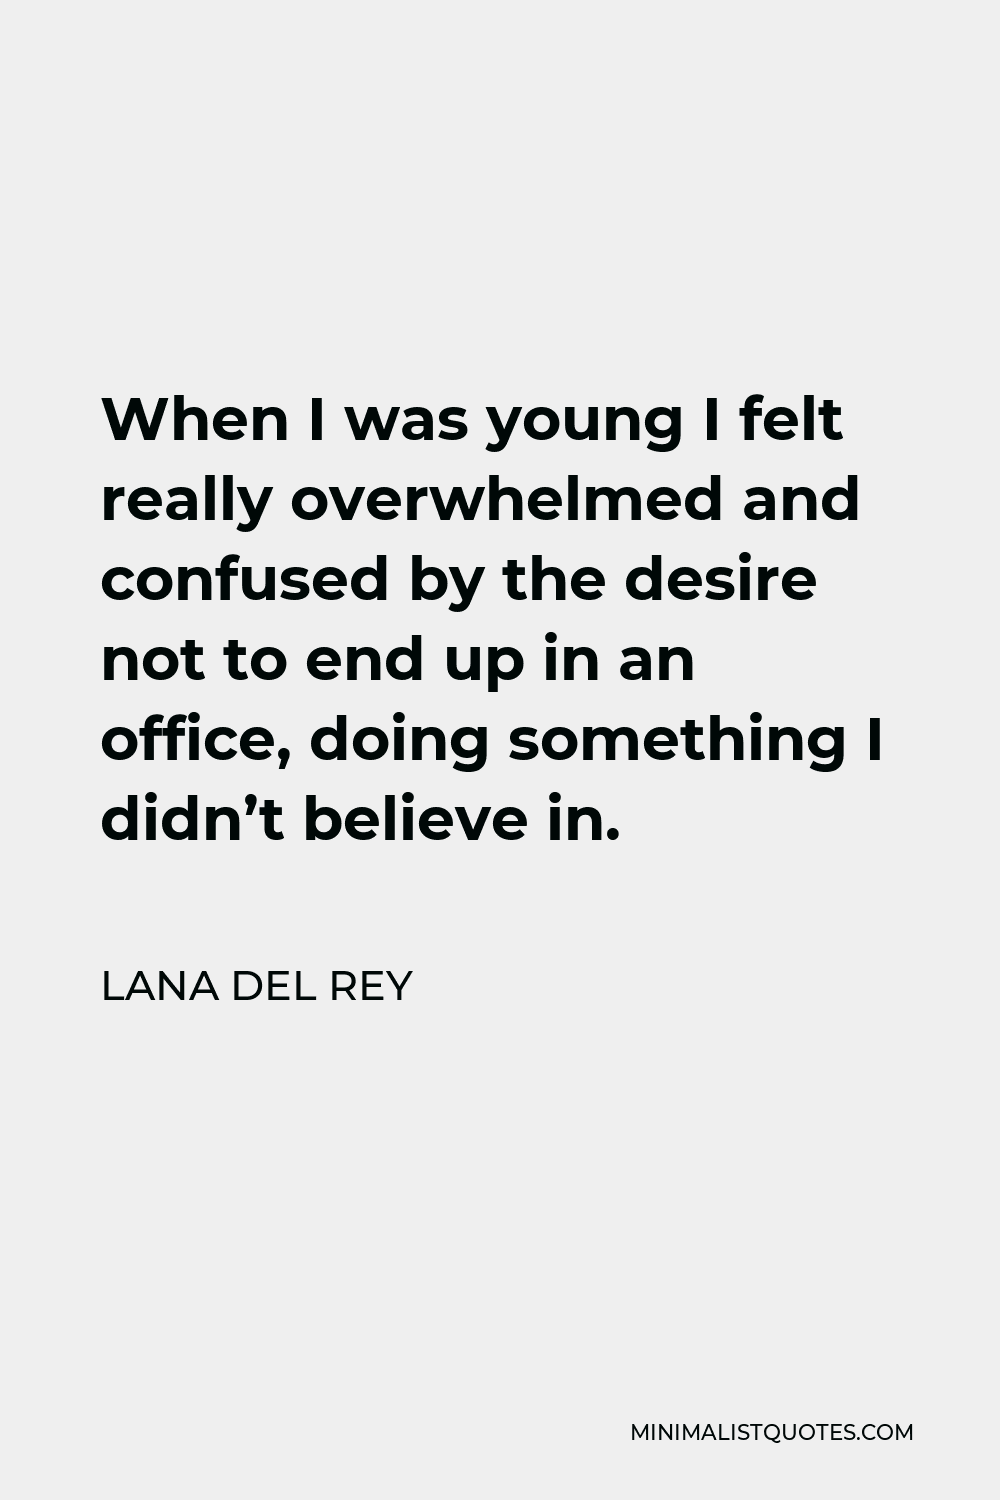 Lana Del Rey Quote - When I was young I felt really overwhelmed and confused by the desire not to end up in an office, doing something I didn’t believe in.